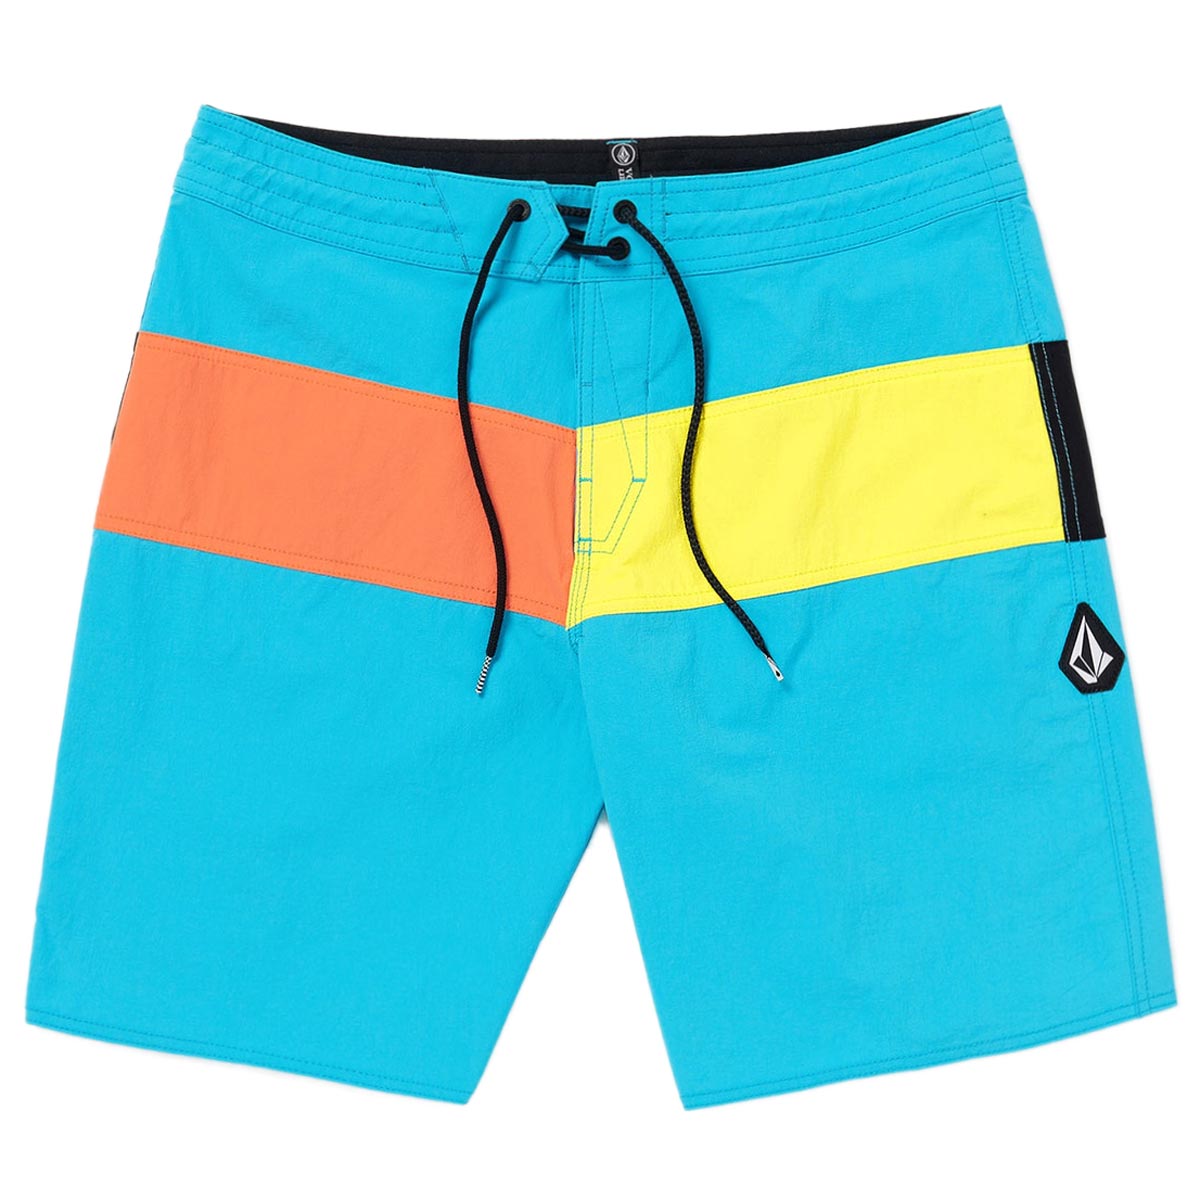 Volcom Vision Liberators 19 Board Shorts - Clearwater image 1